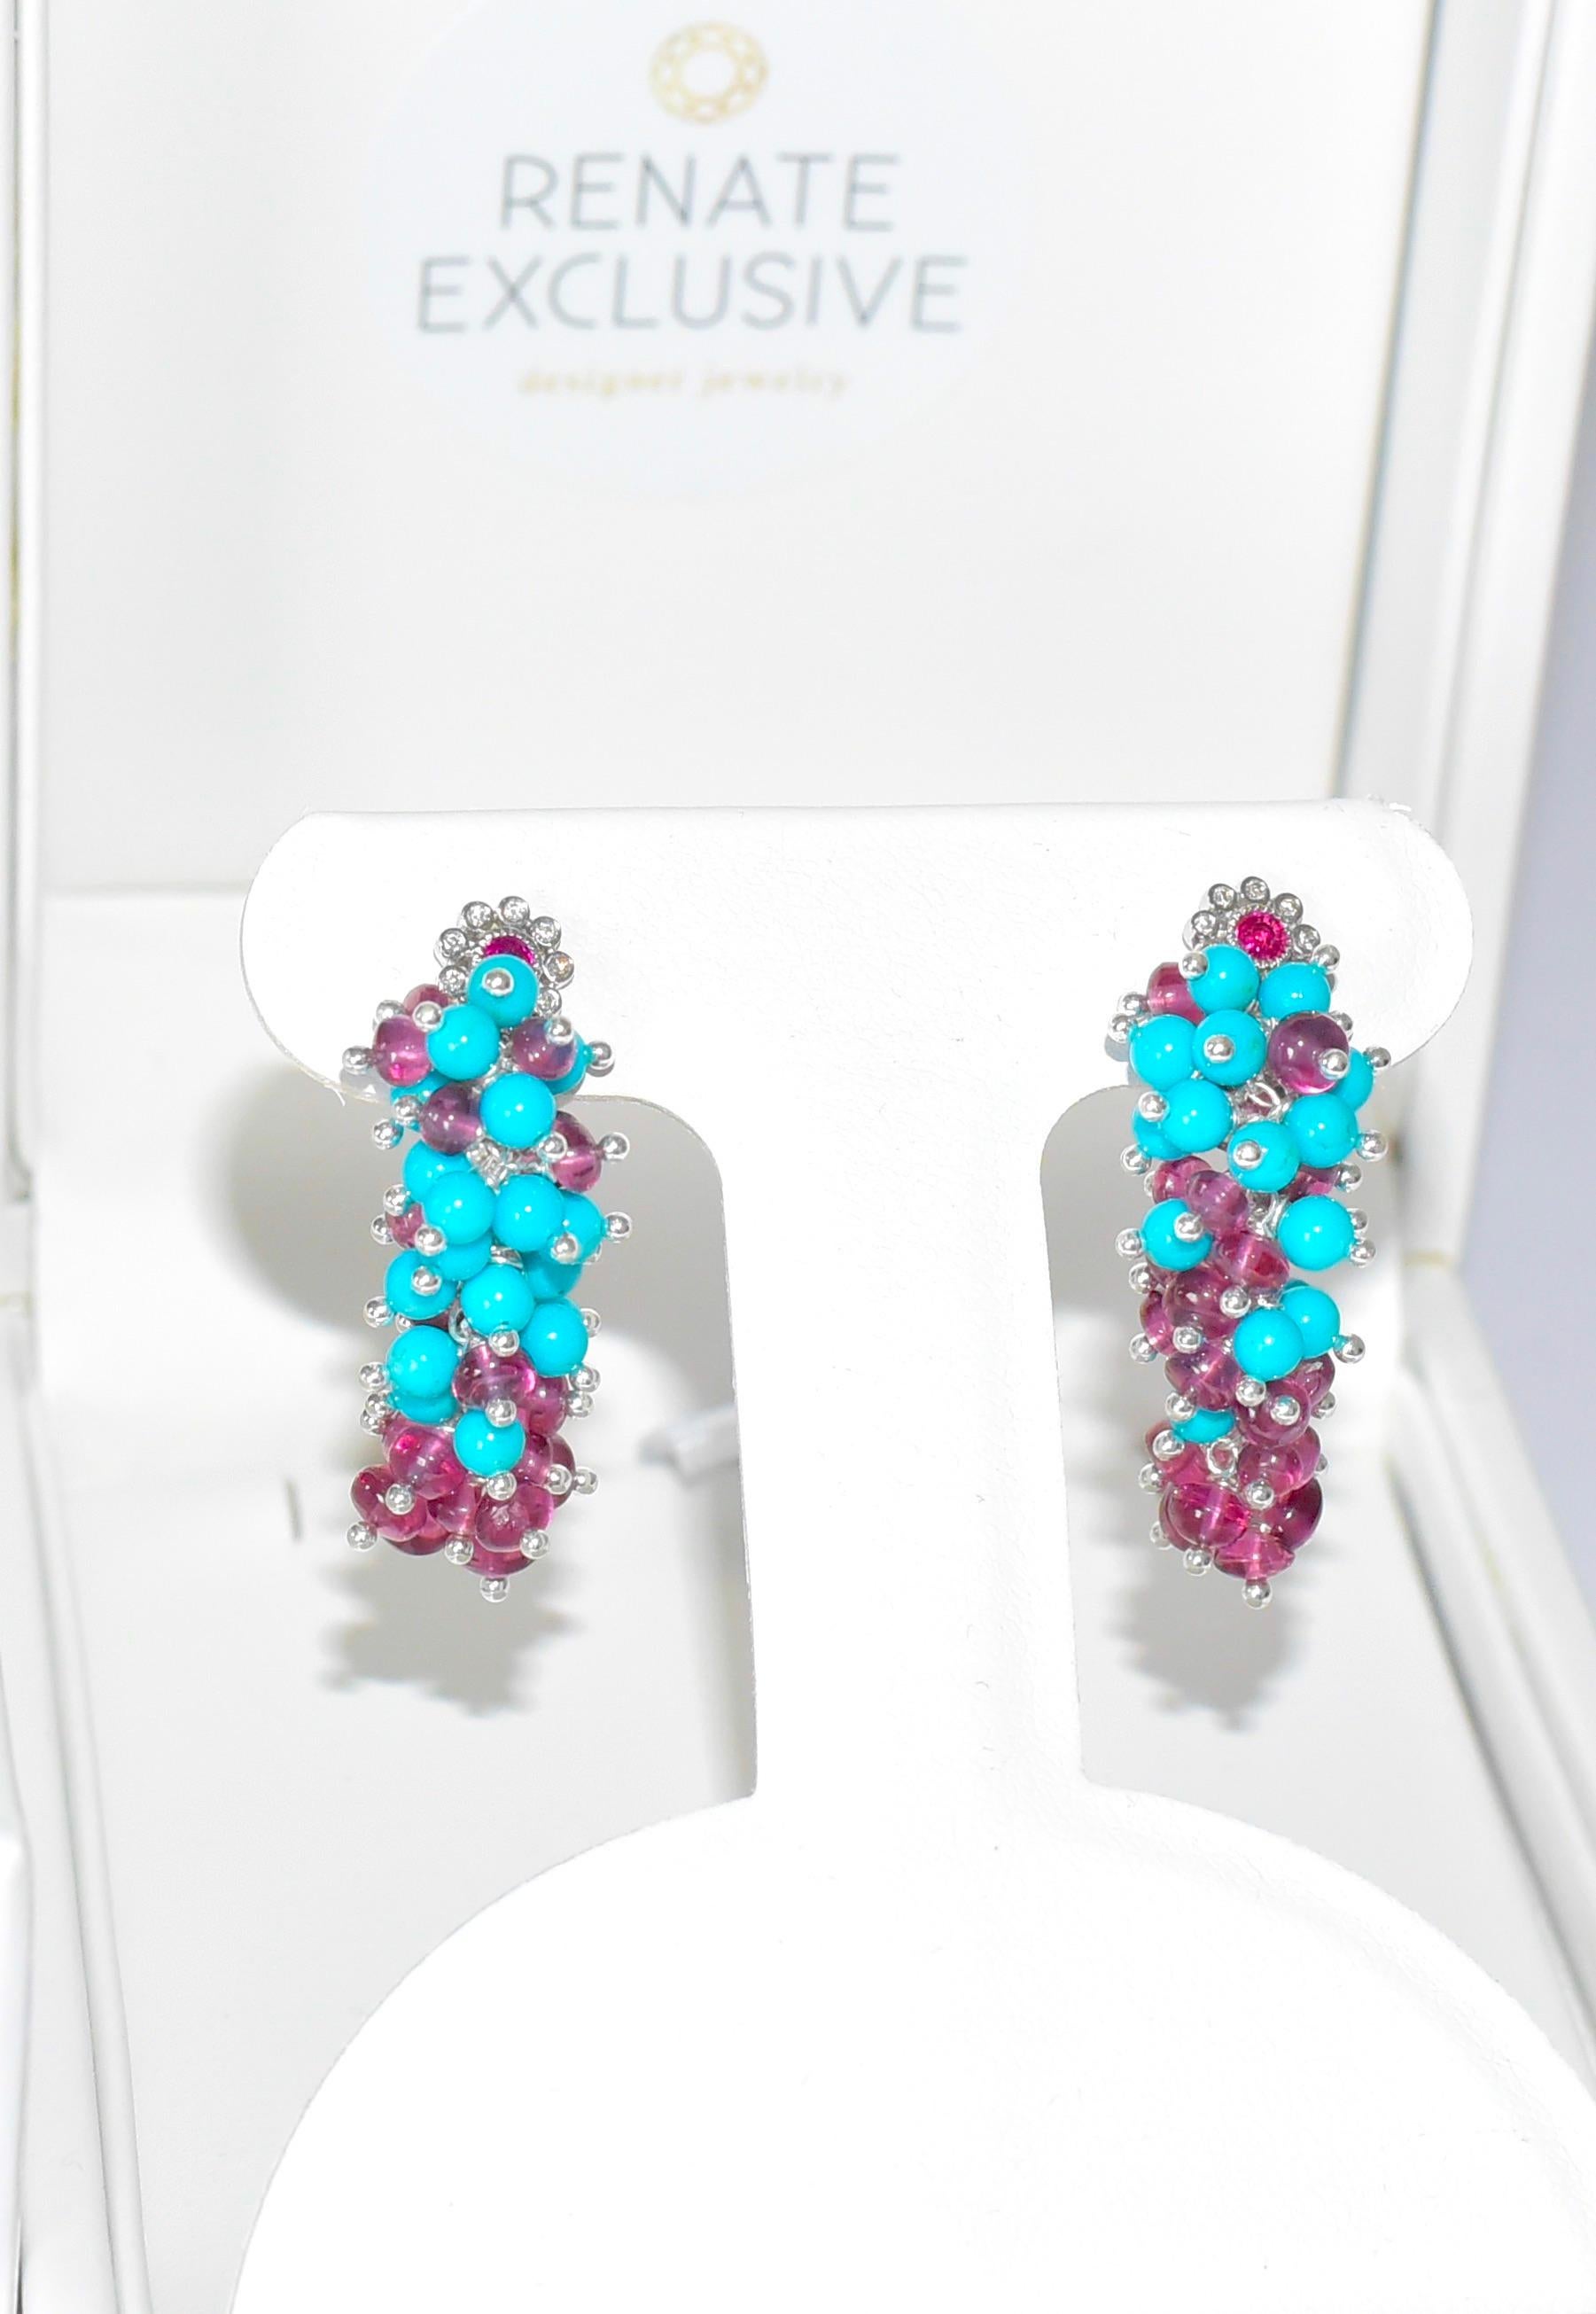 Tens and tens of Sleeping Beauty Turquoise beads have been painstakingly hand-linked along with Malawi Rhodolite Garnet beads. Amazing luxe-style earrings with extraordinary 14K solid white gold diamond flower ear posts with Ruby centers and bezel